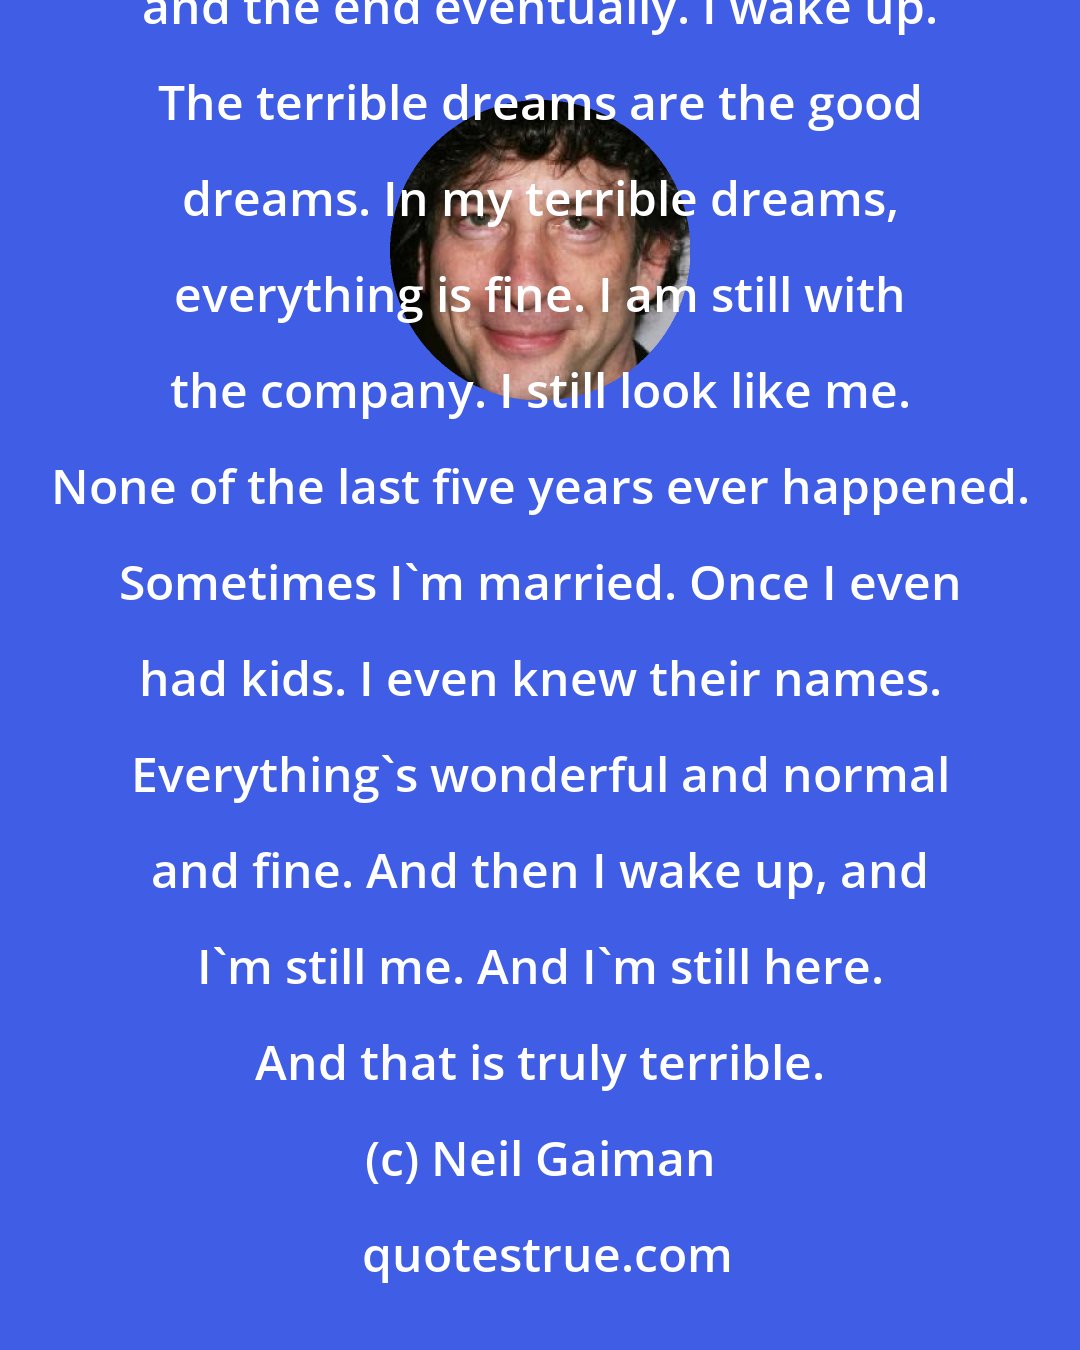 Neil Gaiman: I only have two kinds of dreams: the bad and the terrible. Bad dreams I can cope with. They're just nightmares, and the end eventually. I wake up. The terrible dreams are the good dreams. In my terrible dreams, everything is fine. I am still with the company. I still look like me. None of the last five years ever happened. Sometimes I'm married. Once I even had kids. I even knew their names. Everything's wonderful and normal and fine. And then I wake up, and I'm still me. And I'm still here. And that is truly terrible.